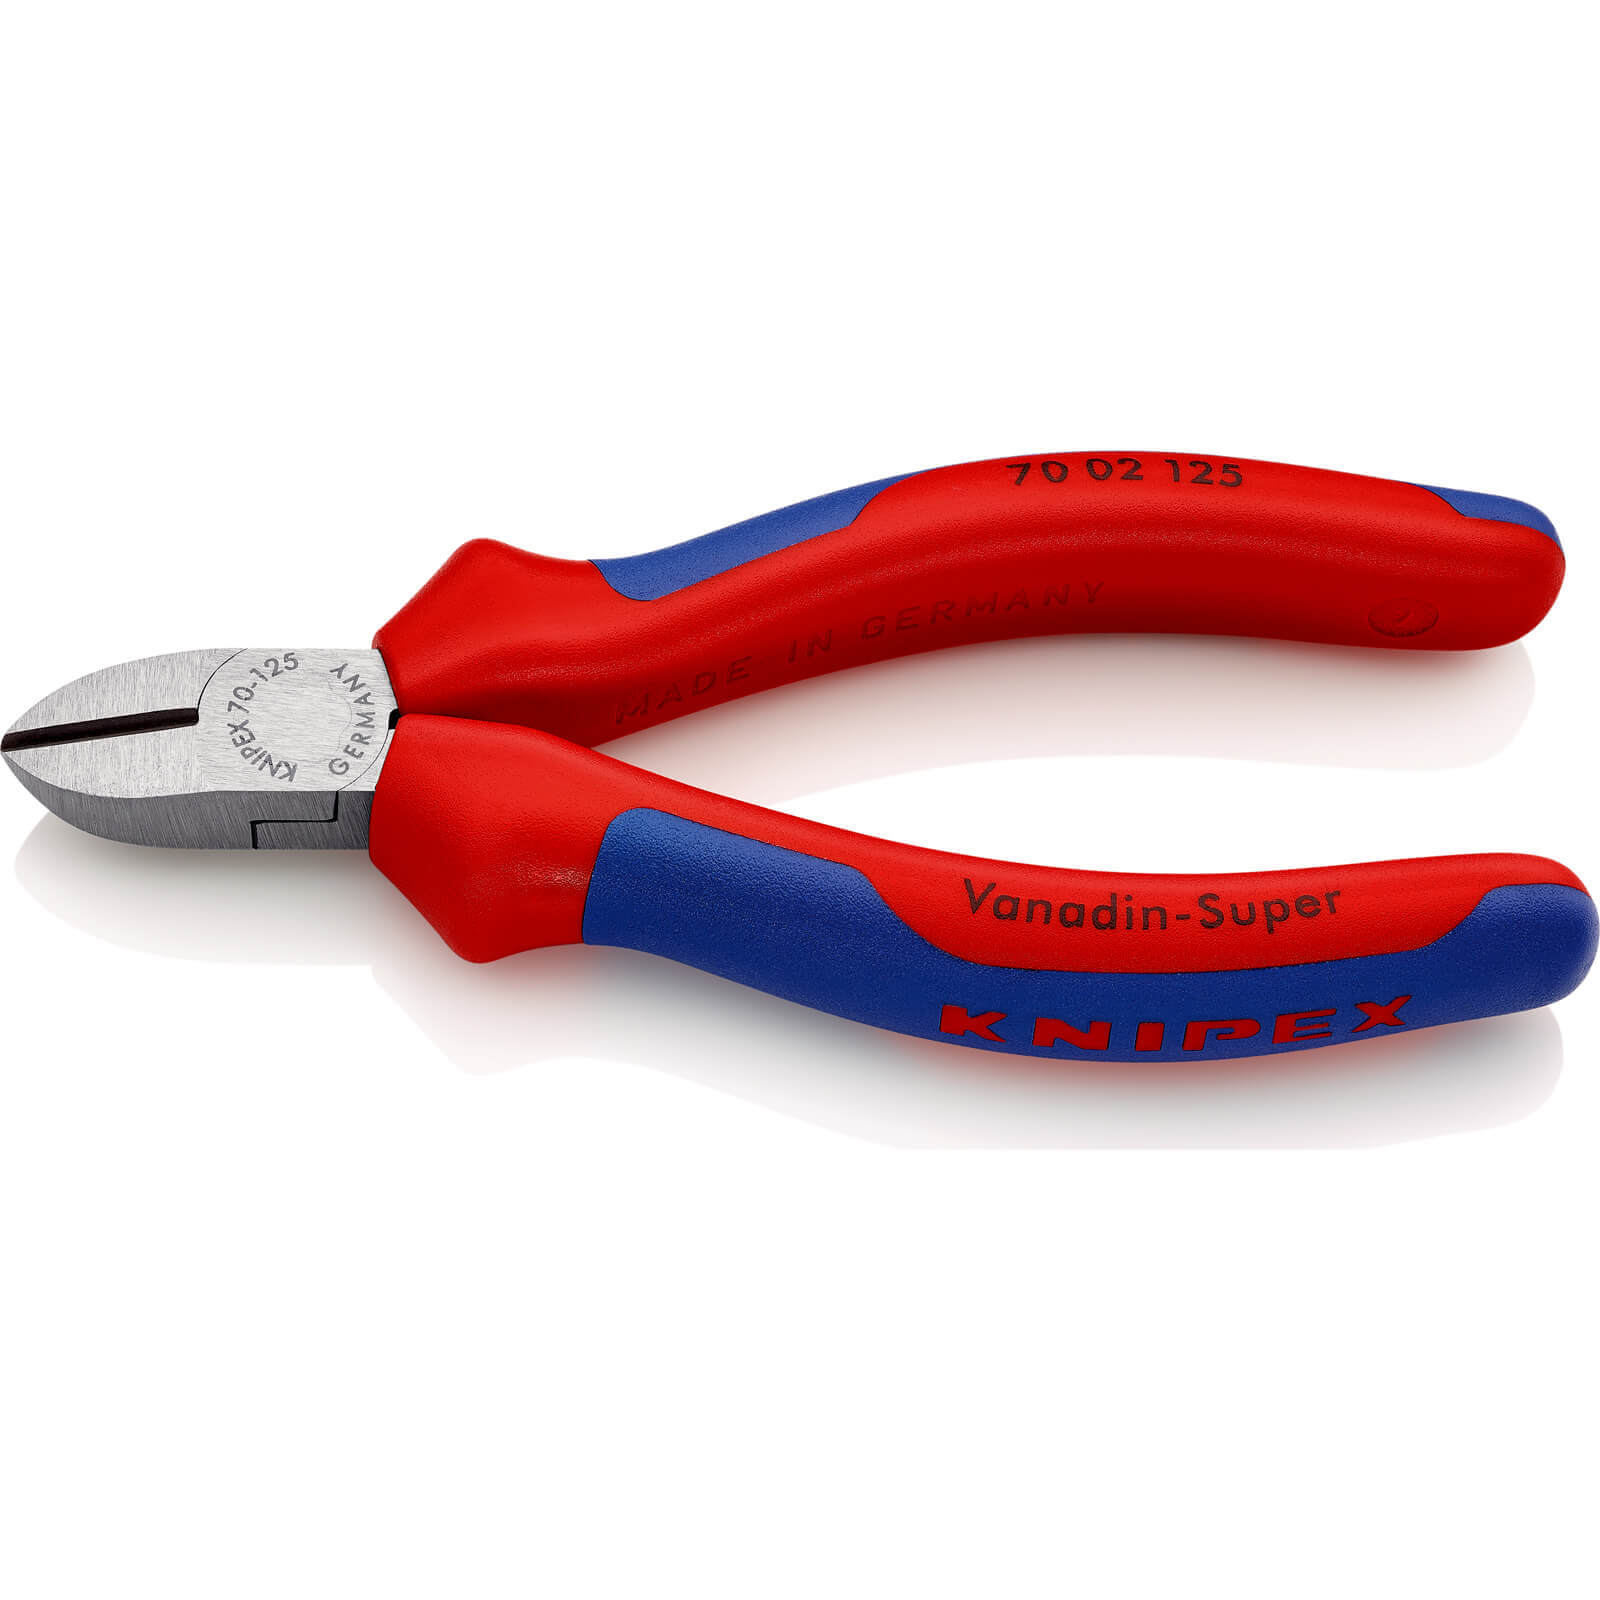 Image of Knipex 70 02 Diagonal Side Cutting Pliers 125mm